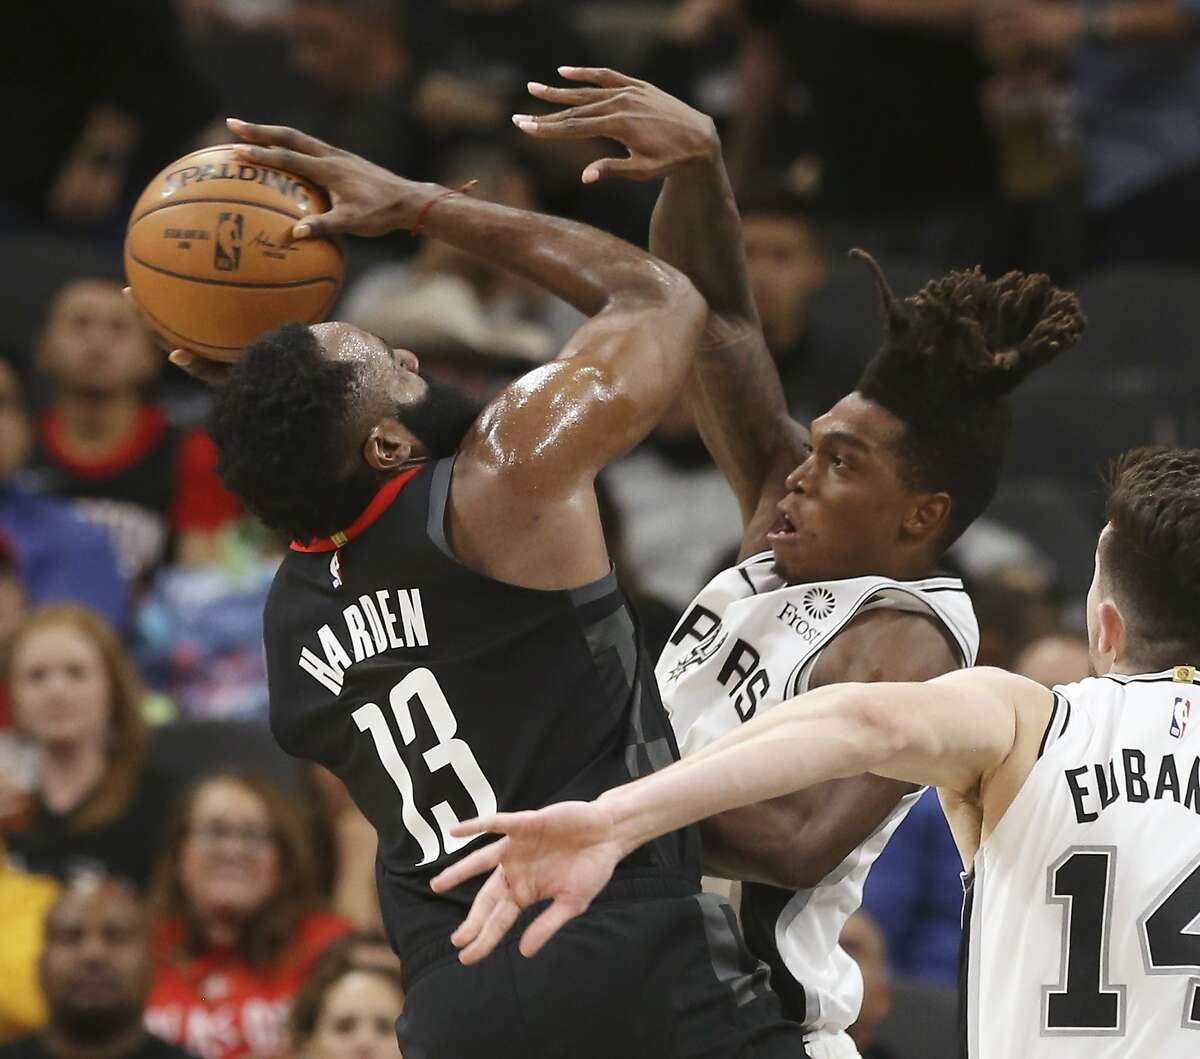 Spurs' Lonnie Walker IV (01) puts pressure on Houston Rockets' James Harden (13) during their game at the AT&T Center on Tuesday, Dec. 3, 2019.